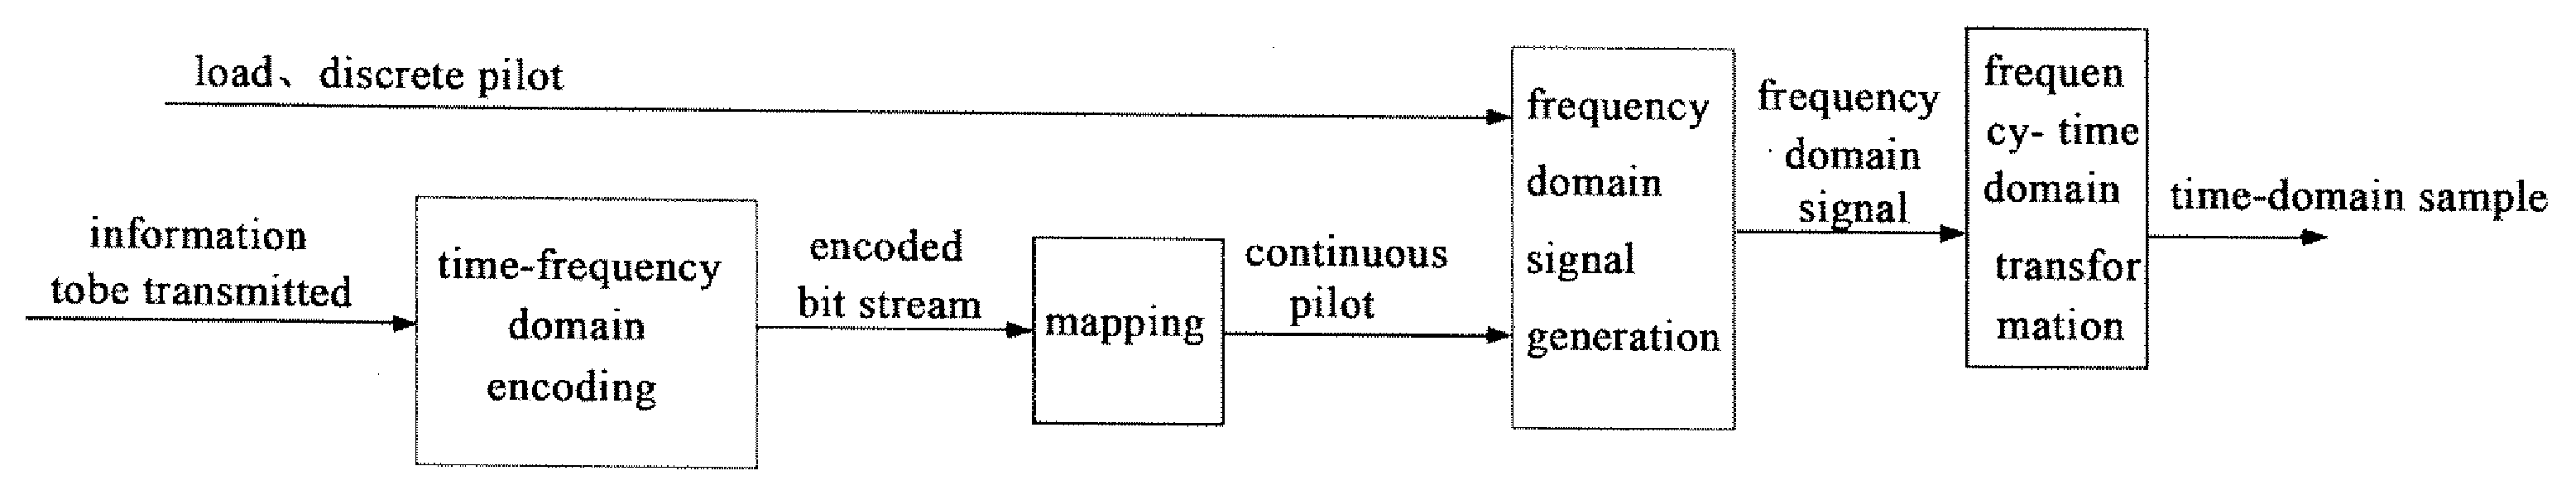 Method and apparatus for transmitting/receiving a continuous pilot code in a multi-carrier system